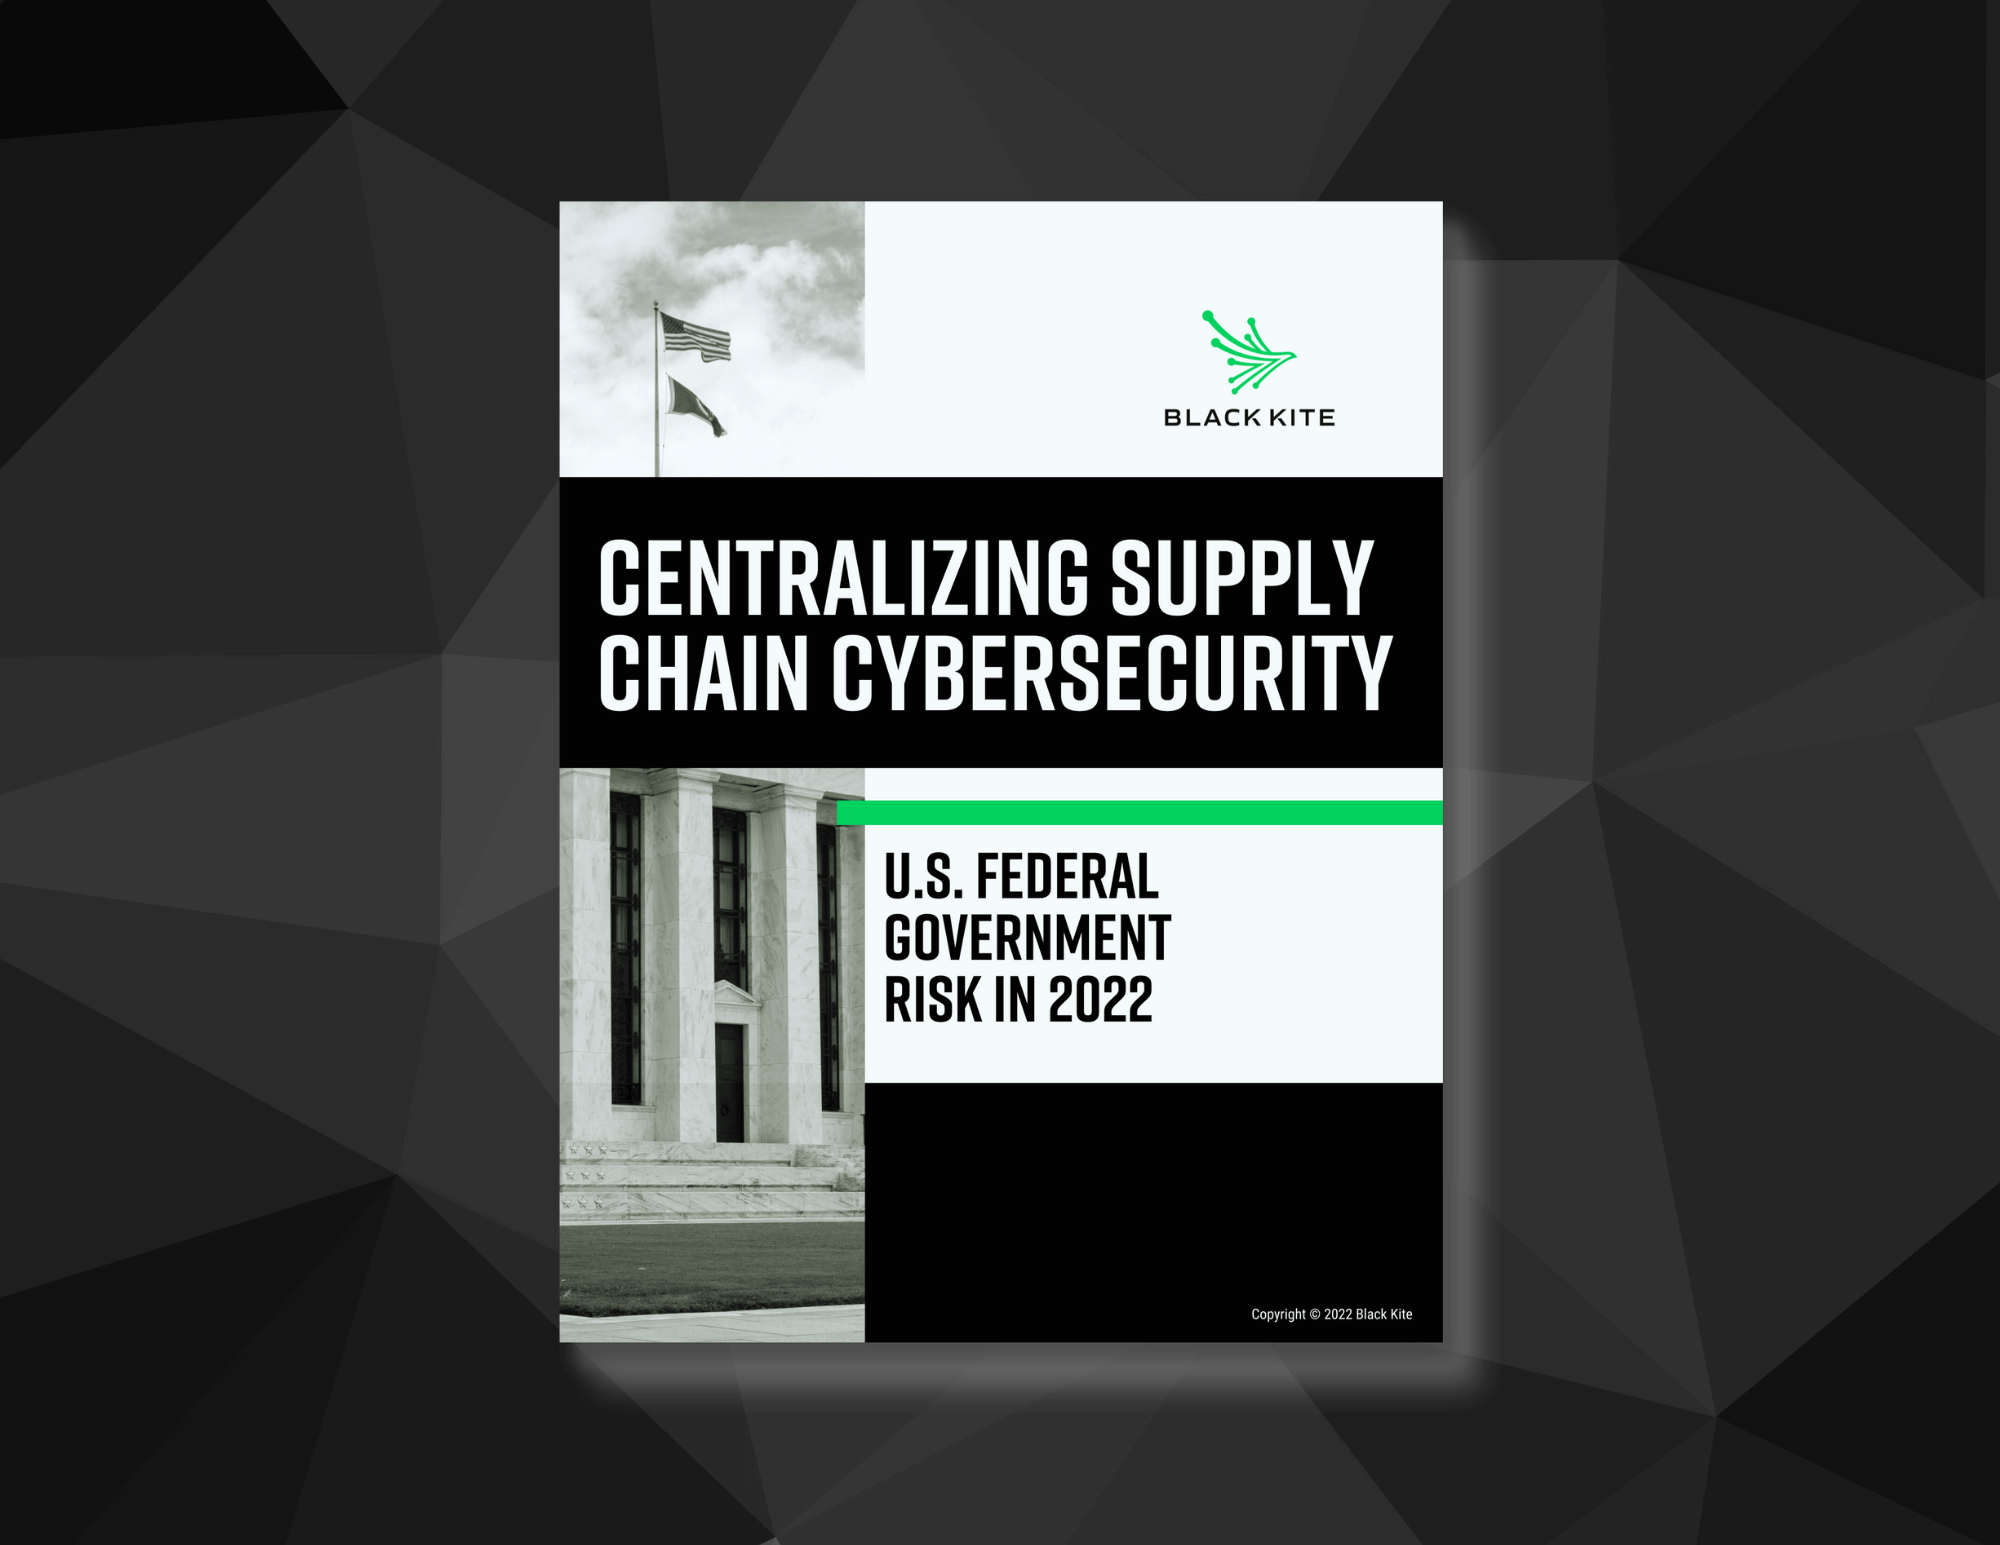 Centralizing Supply Chain Cybersecurity: U.S. Federal Government Risk in 2022